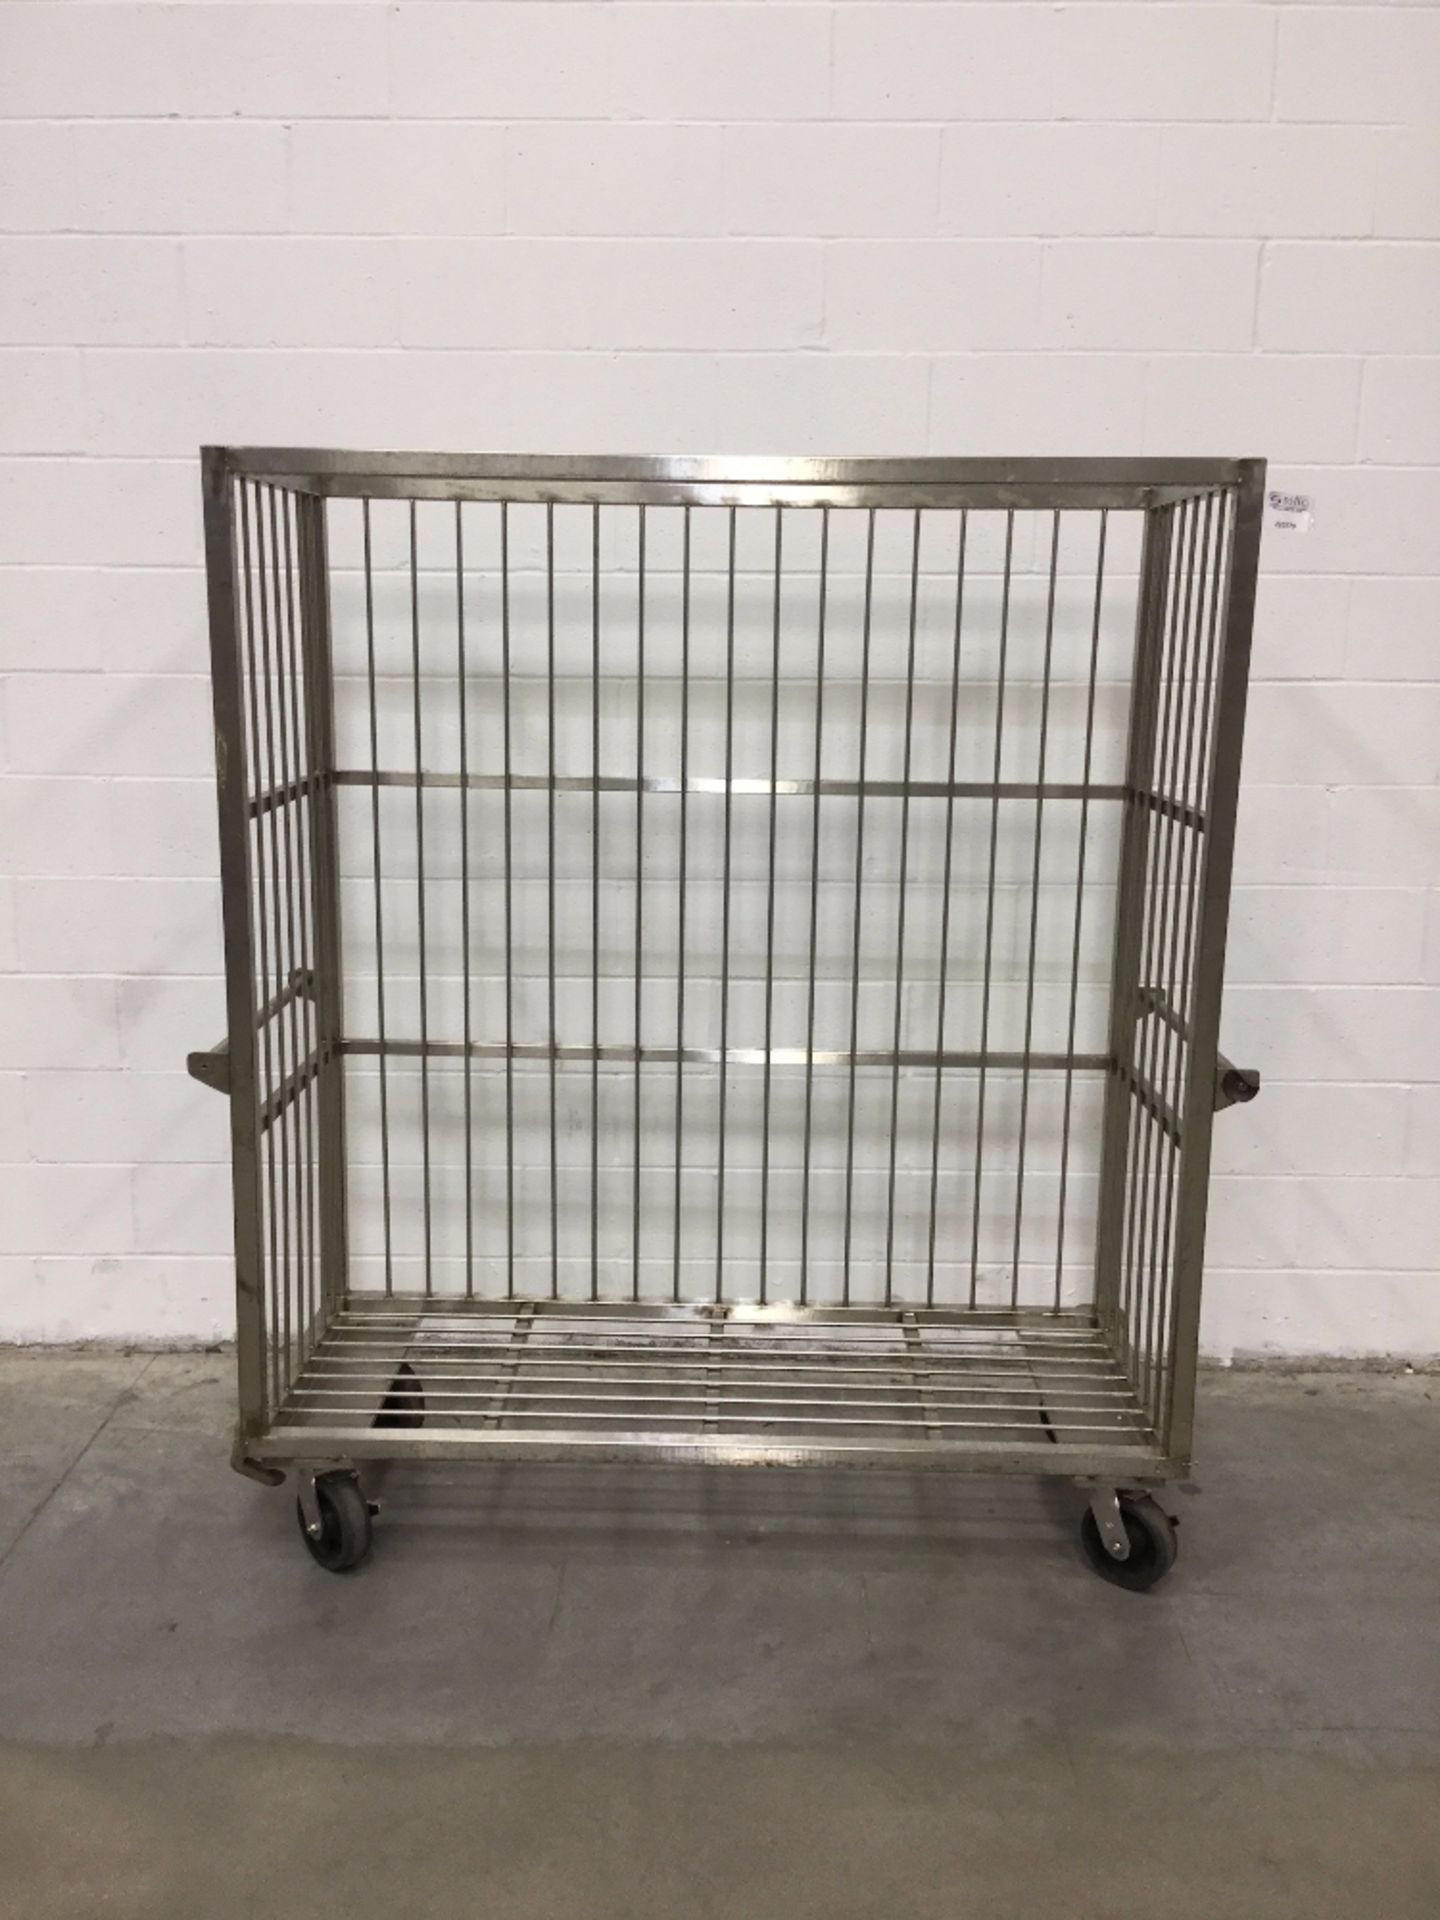 5' Portable Stainless Steel Storage Cage